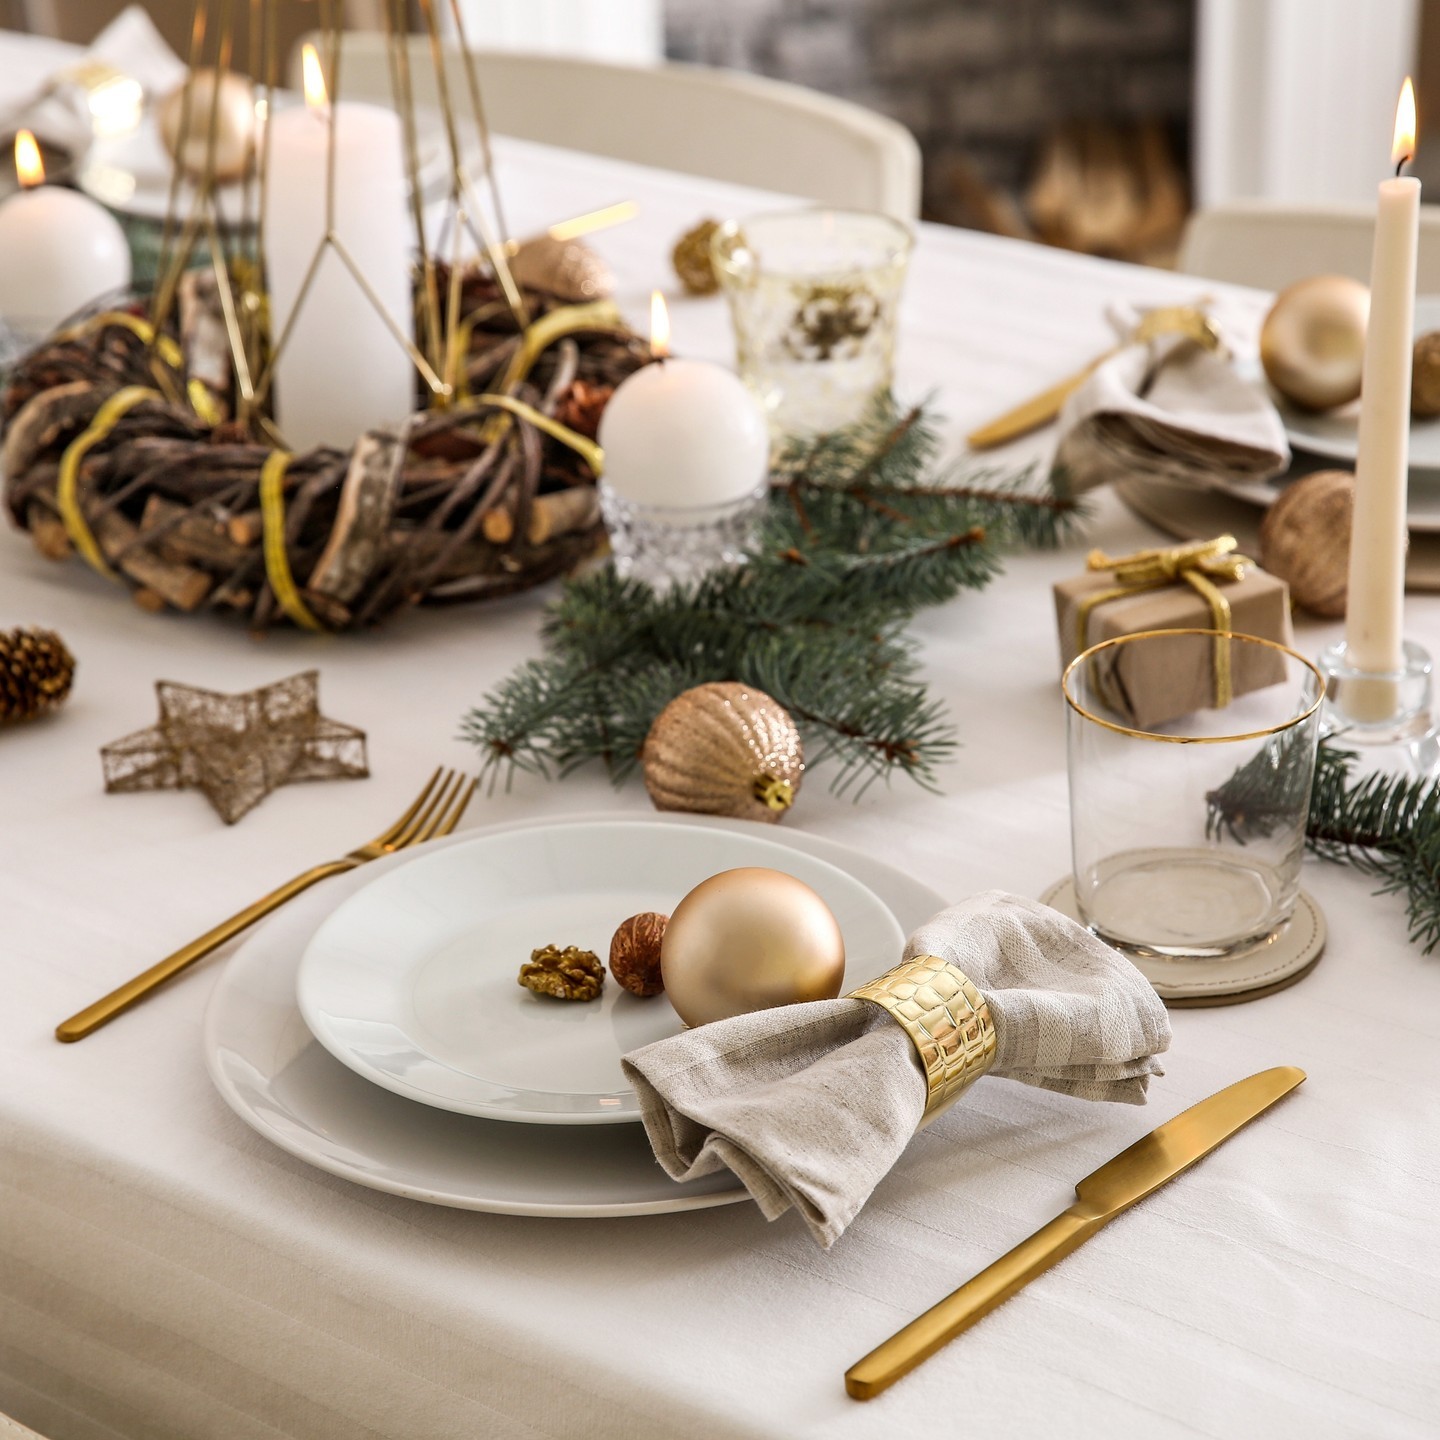 Holiday Dining 🍴 With unique holiday dining experiences inside igloos and winter wonderlands or a luxe brunch with Santa and your little one’s favorite reindeers, there is a plethora of festive dining fun in Wisconsin that will keep you feeling holly and jolly all December long. Check out the list at FabulousWisconsin.com. {link in bio}